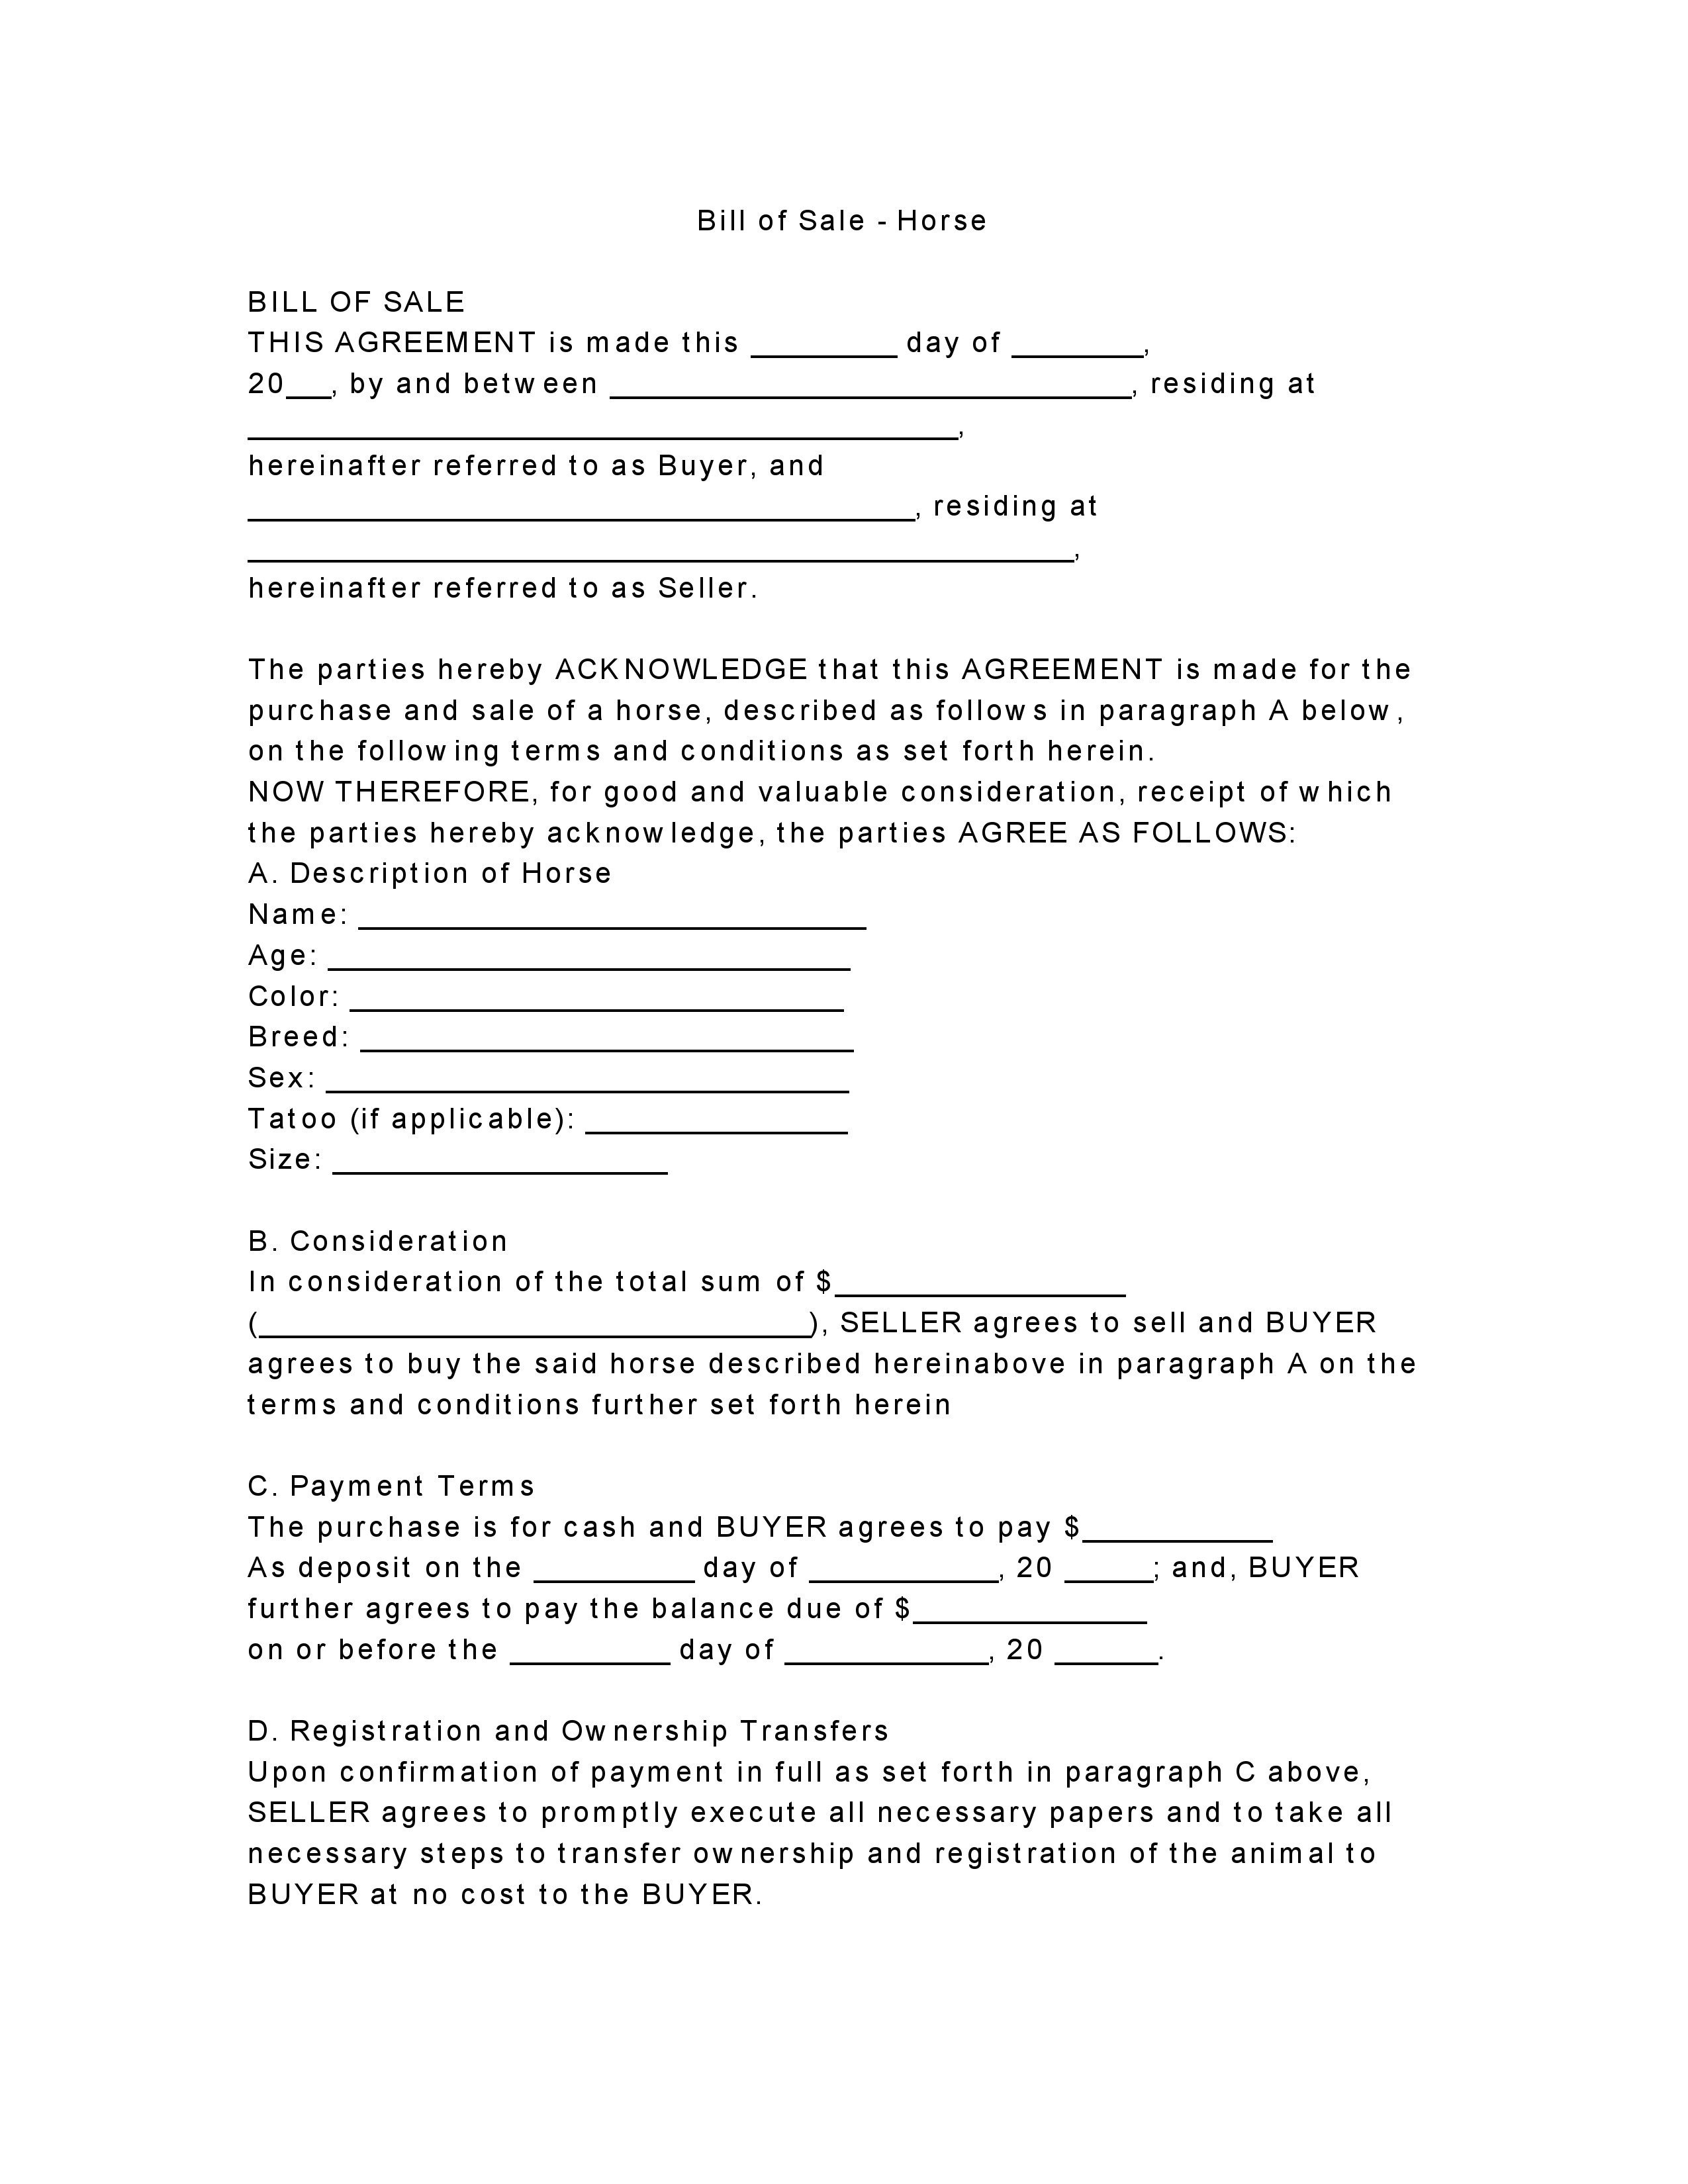 Transfer Of Ownership Agreement Free Horse Bill Of Sale form Pdf